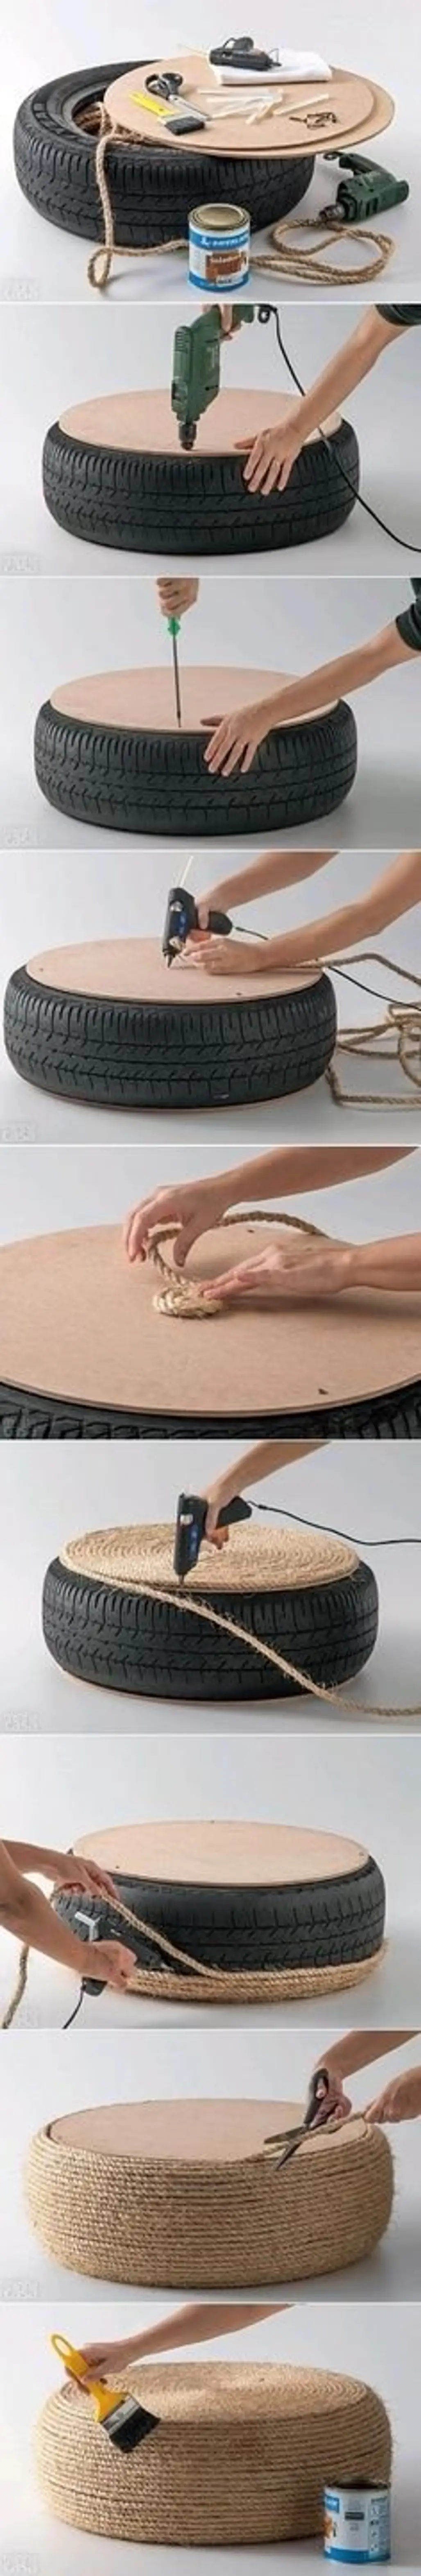 Make a Rope Covered Seat